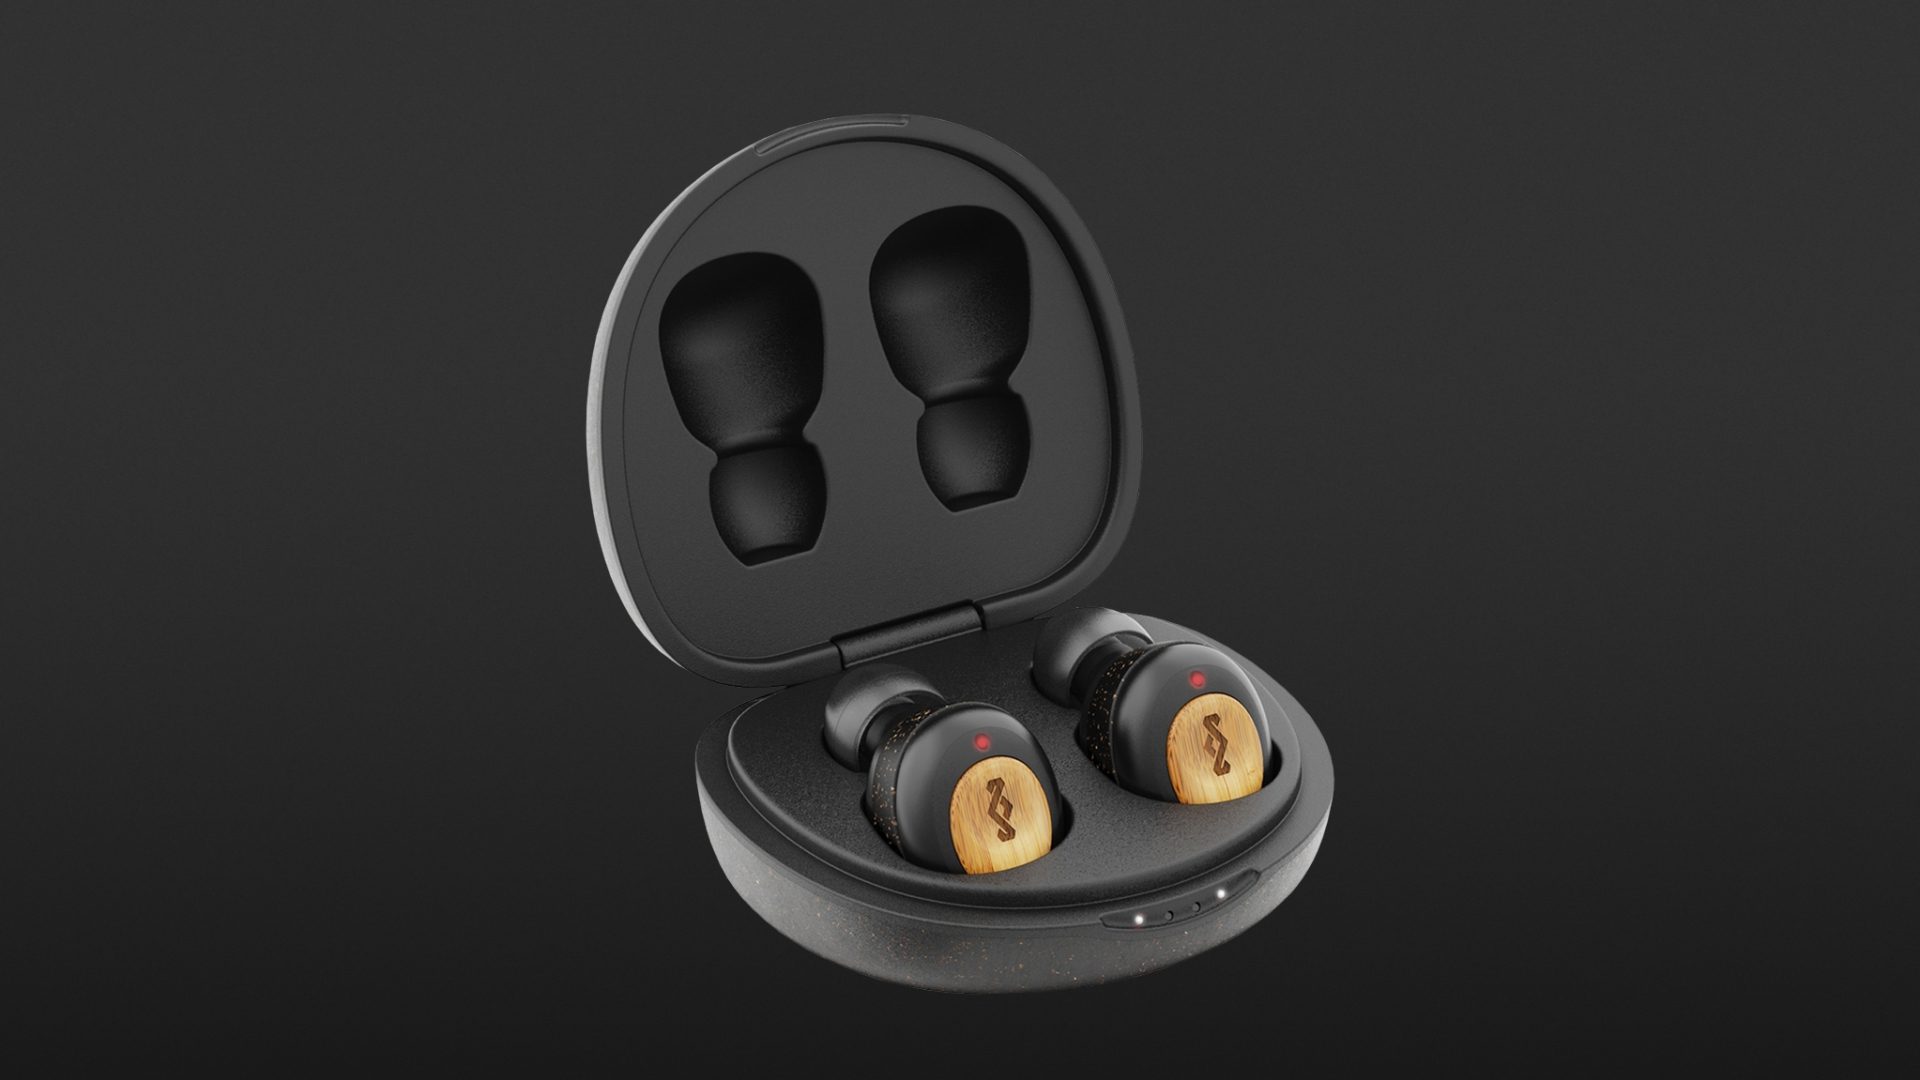 House of Marley Rebel True Wireless Earbuds Bluetooth Earbuds with